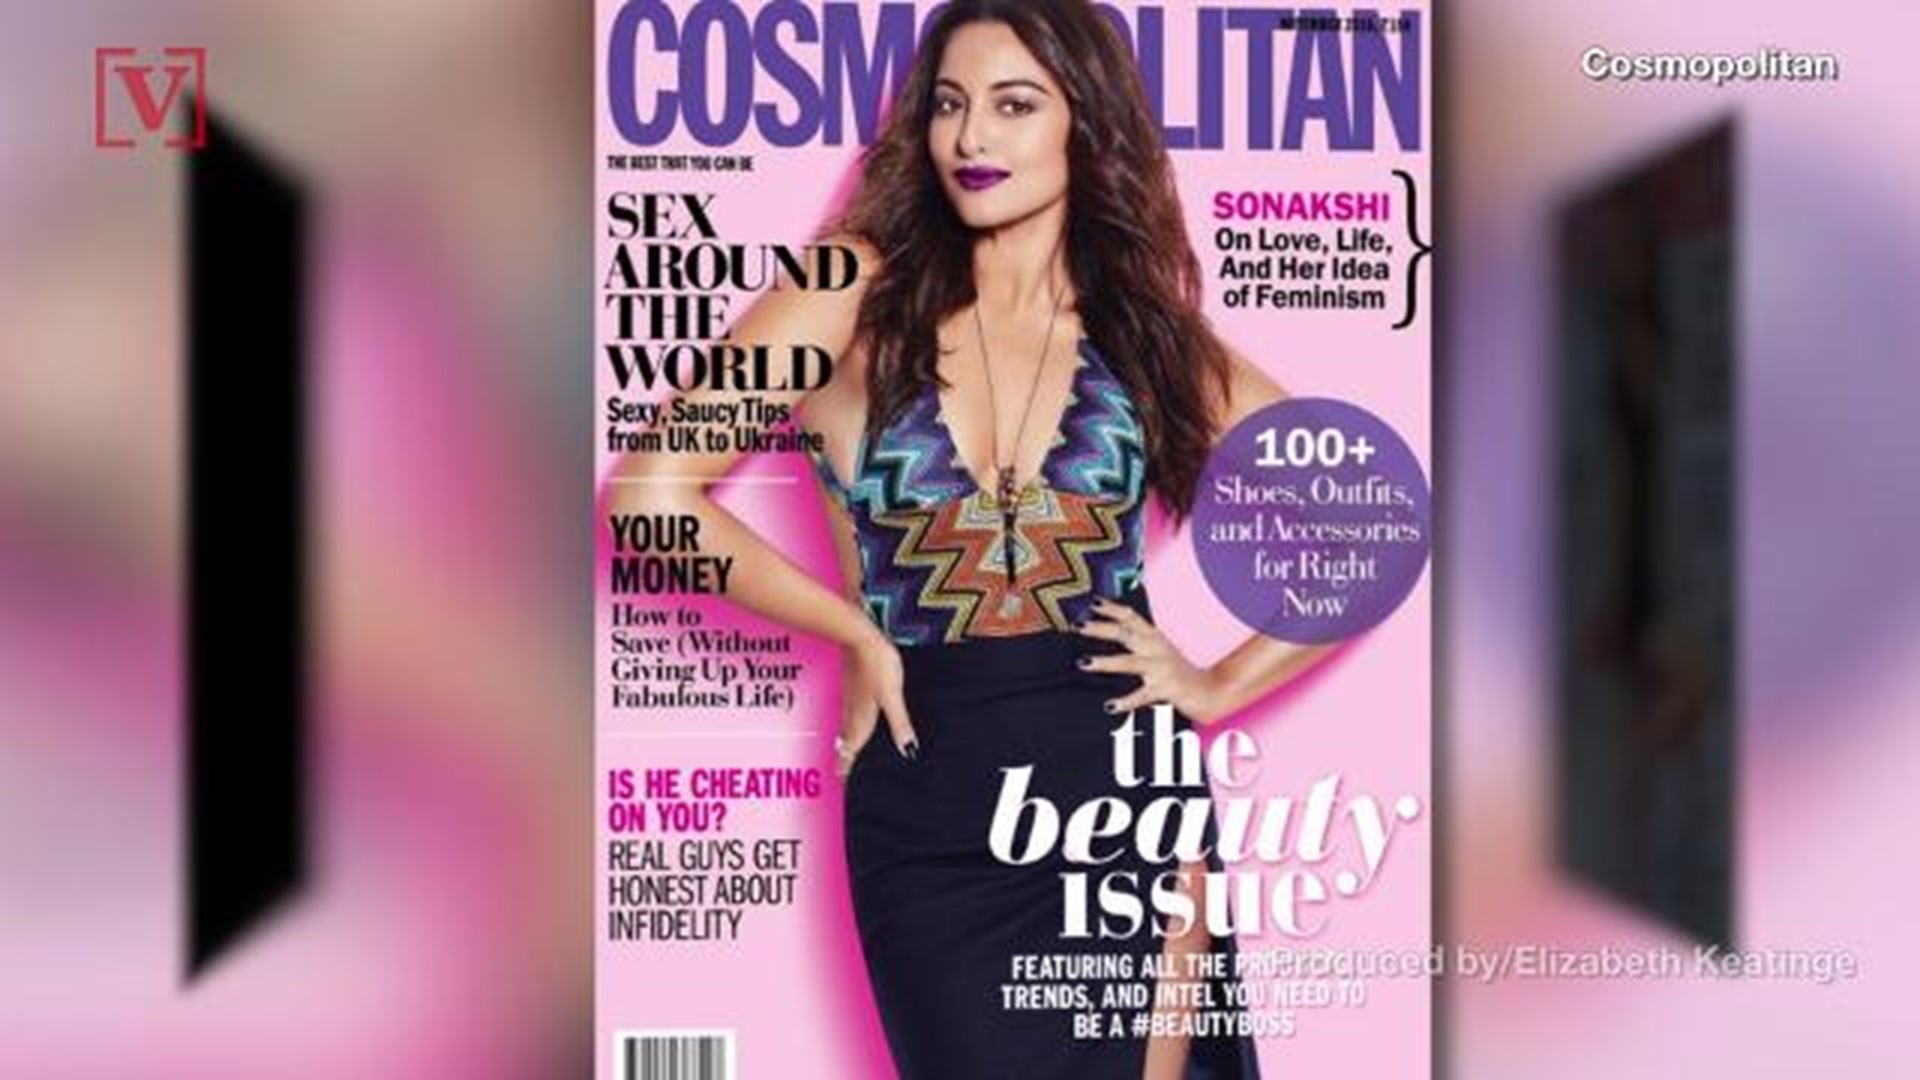 1920px x 1080px - Walmart to remove 'Cosmopolitan' from checkout lines, says it's a 'business  decision' | 13newsnow.com